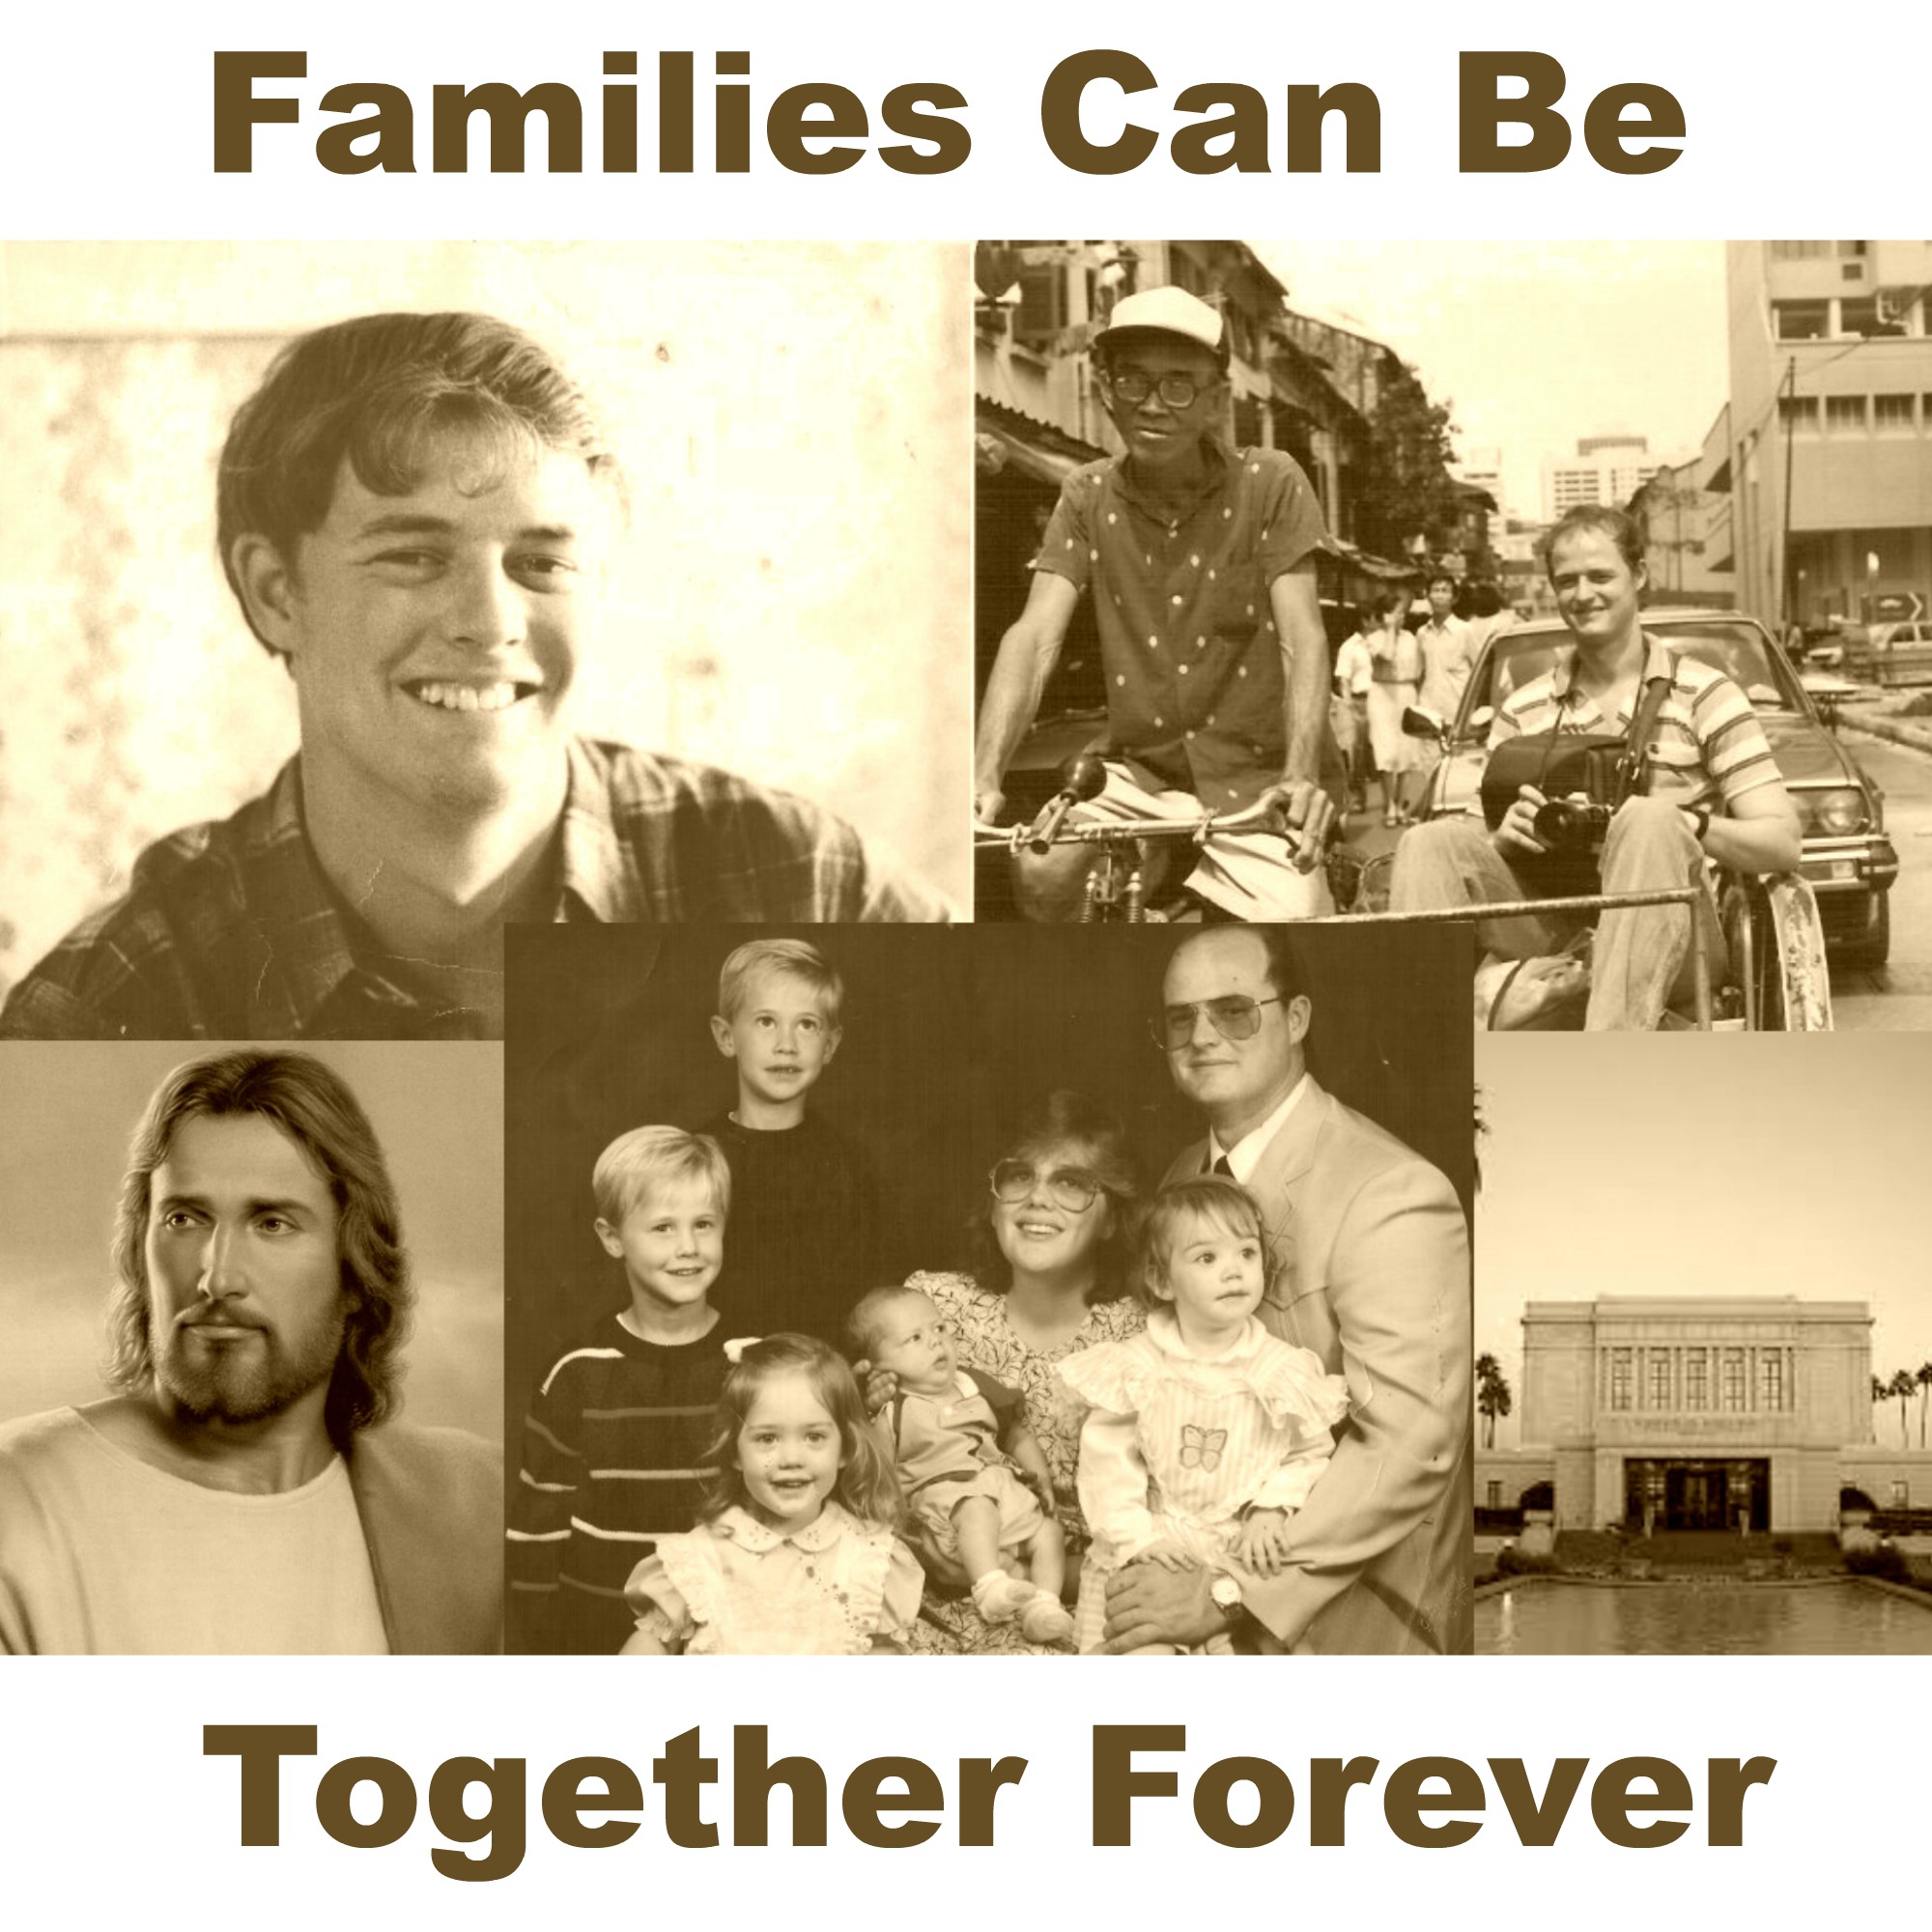 Families can be together forever.